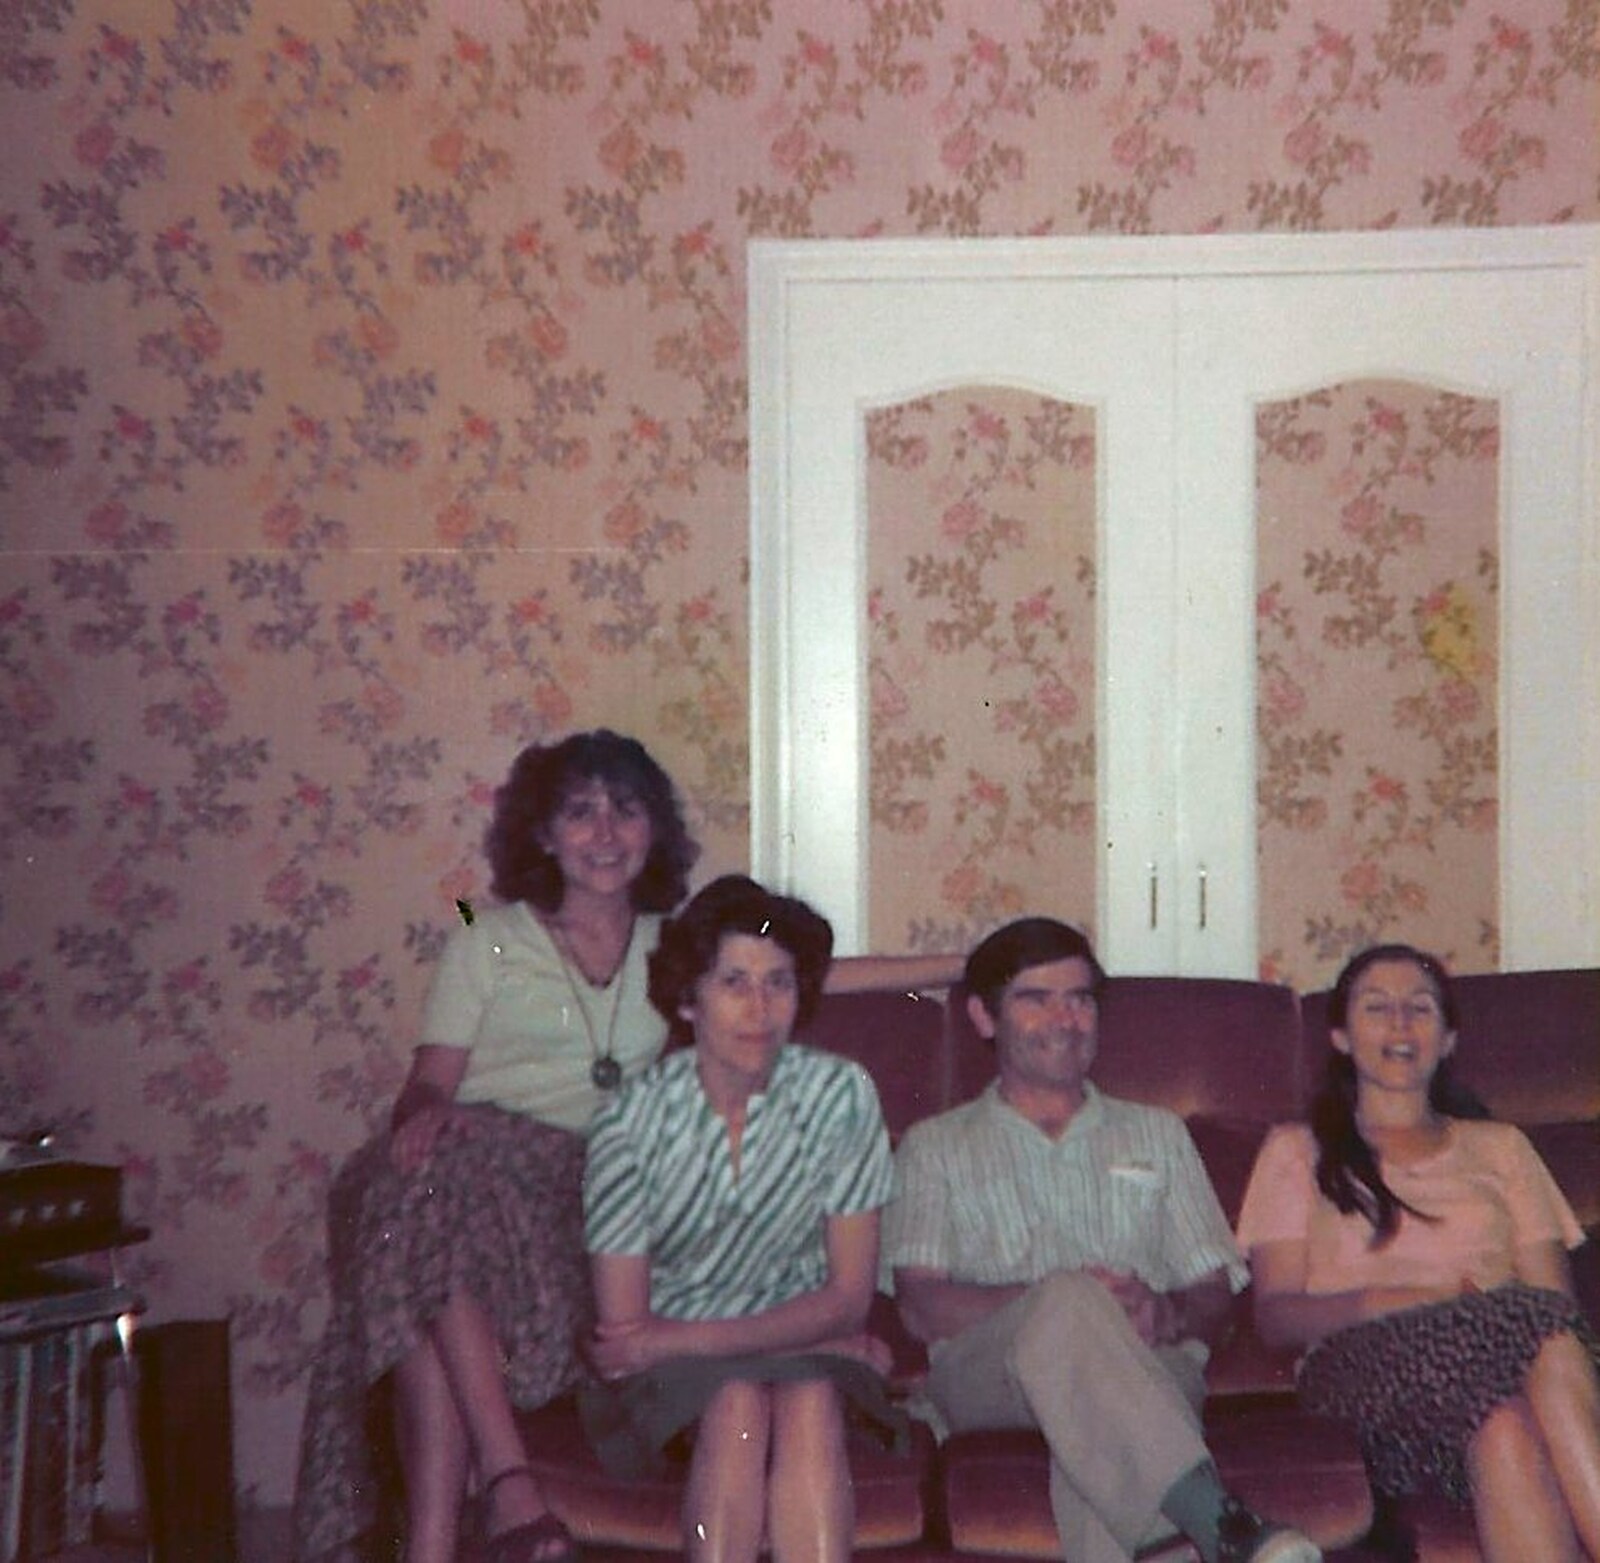 From right to left: Claudine, her parents and sister from A Trip to Bram, Aude, France - 25th July 1980